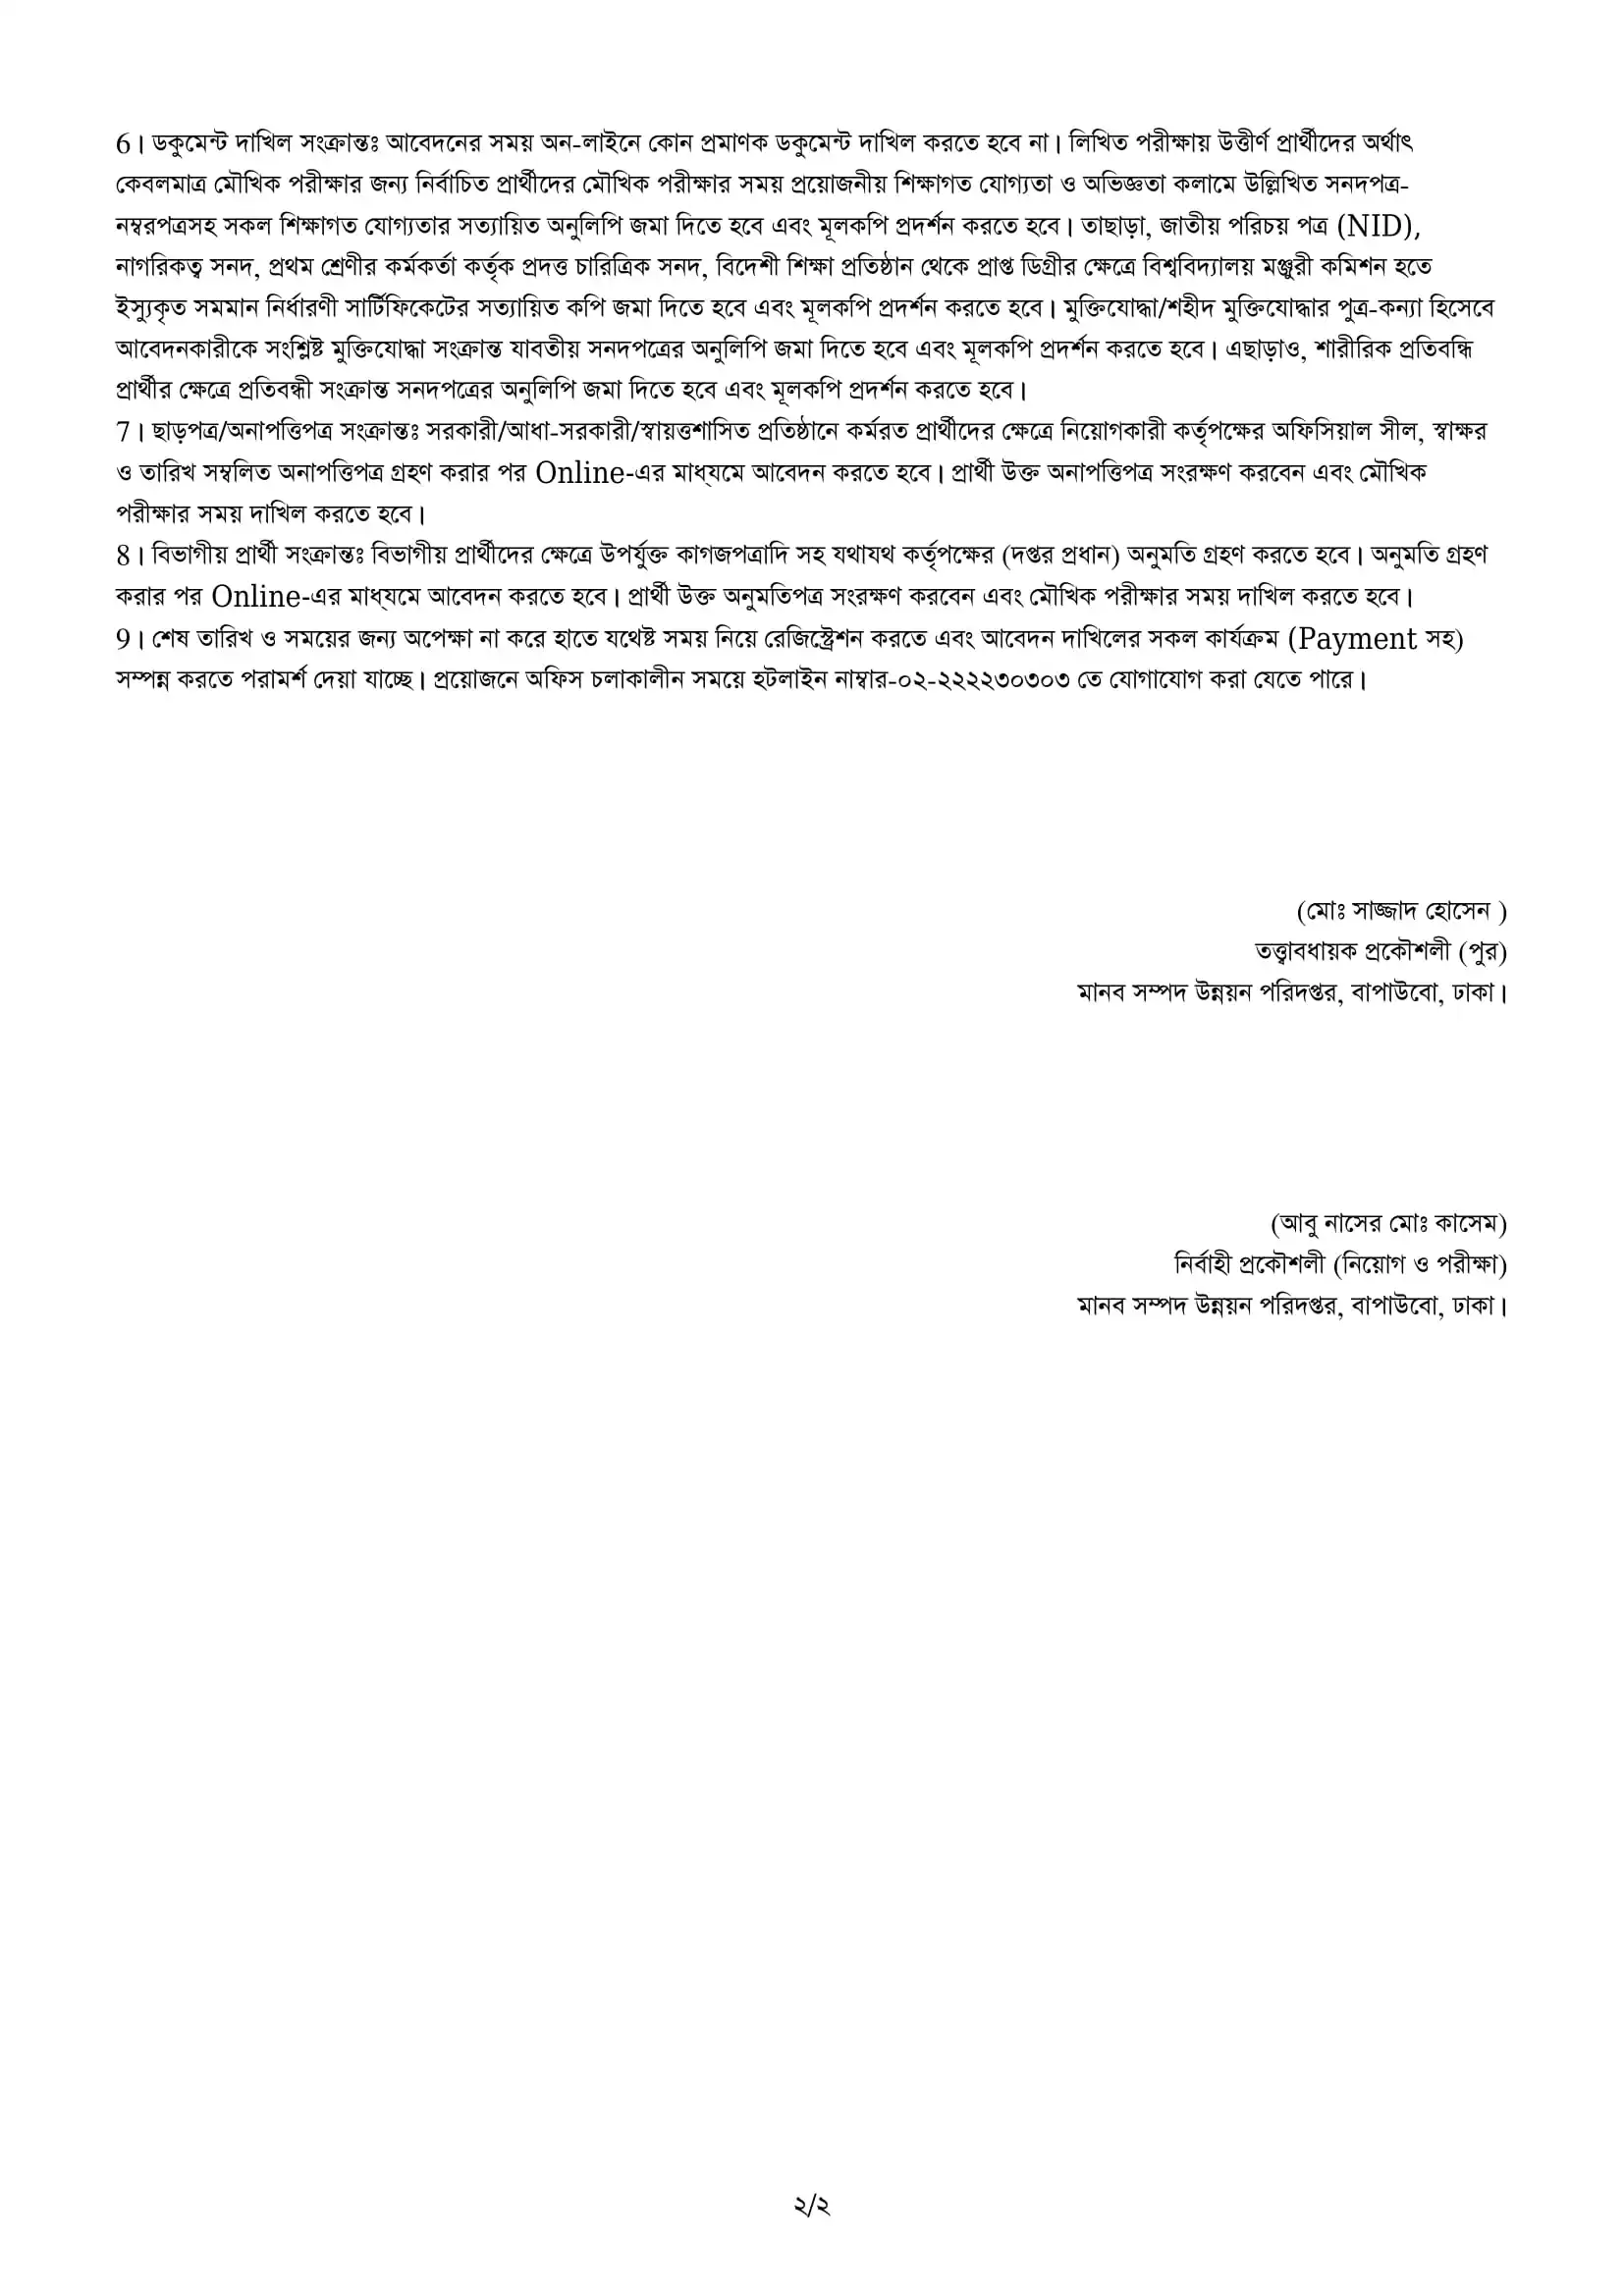 Second page of Bangladesh Water Development Board recruitment circular published on 29 January 2023